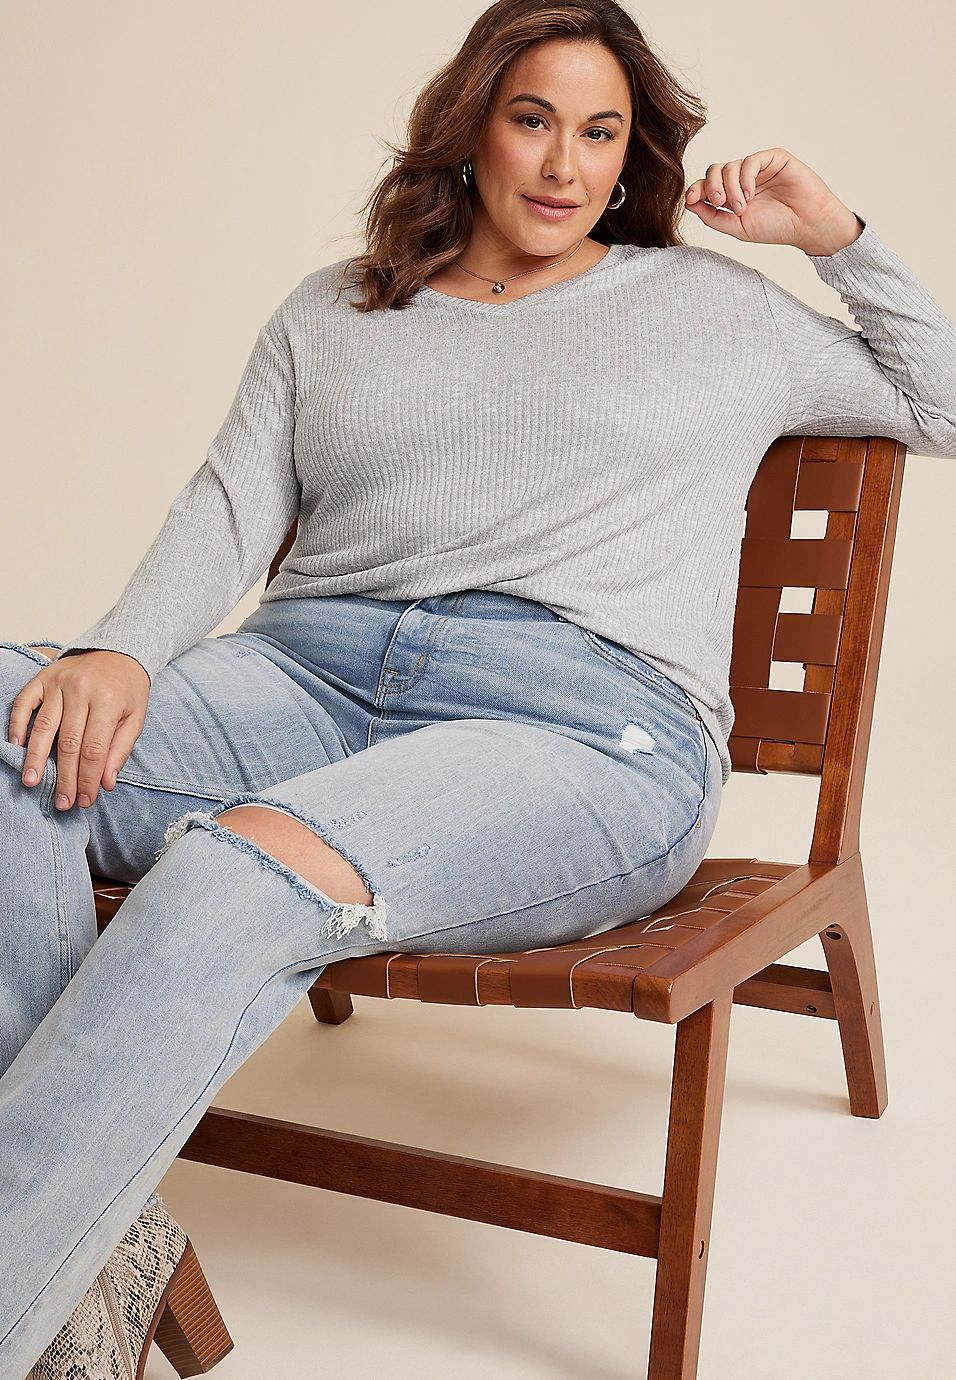 Plus Size 24/7 Victoria Long Sleeve Tee | Maurices